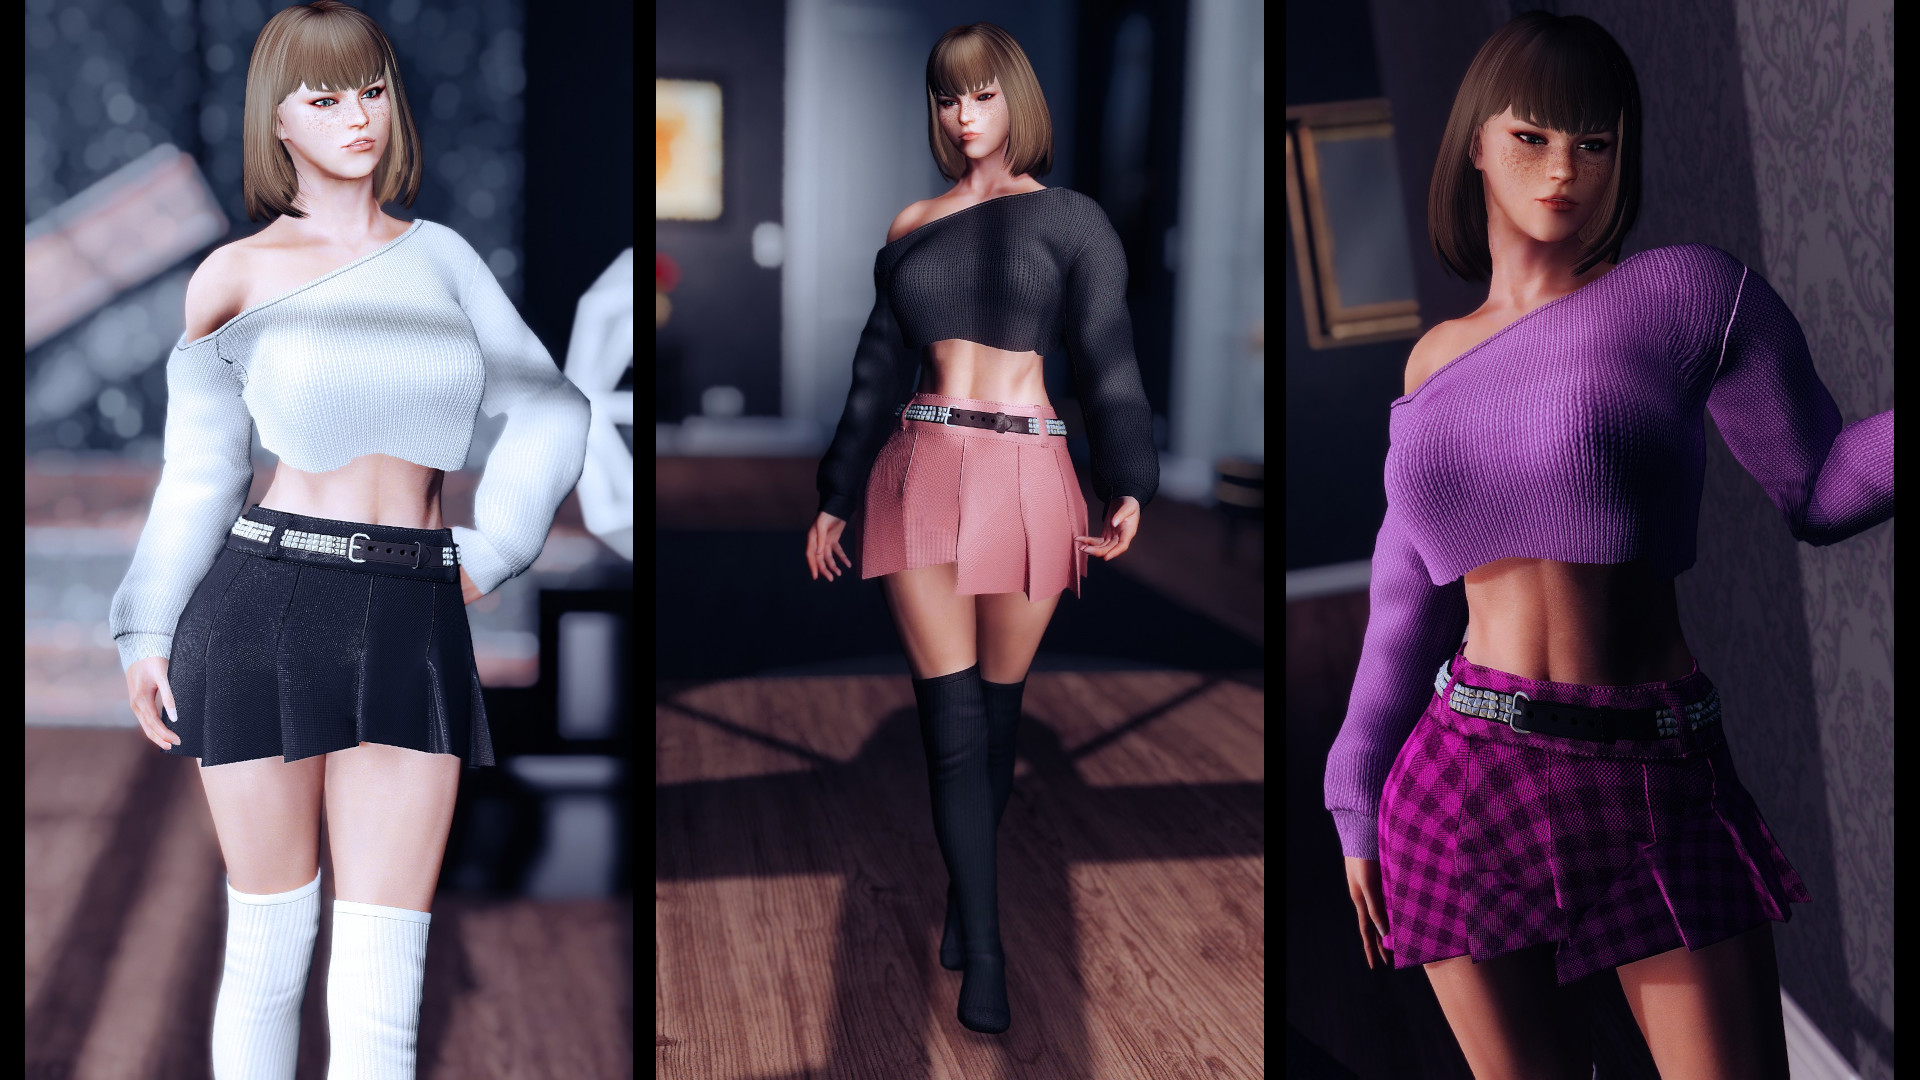 abigail ong recommends skyrim mini skirt mod pic